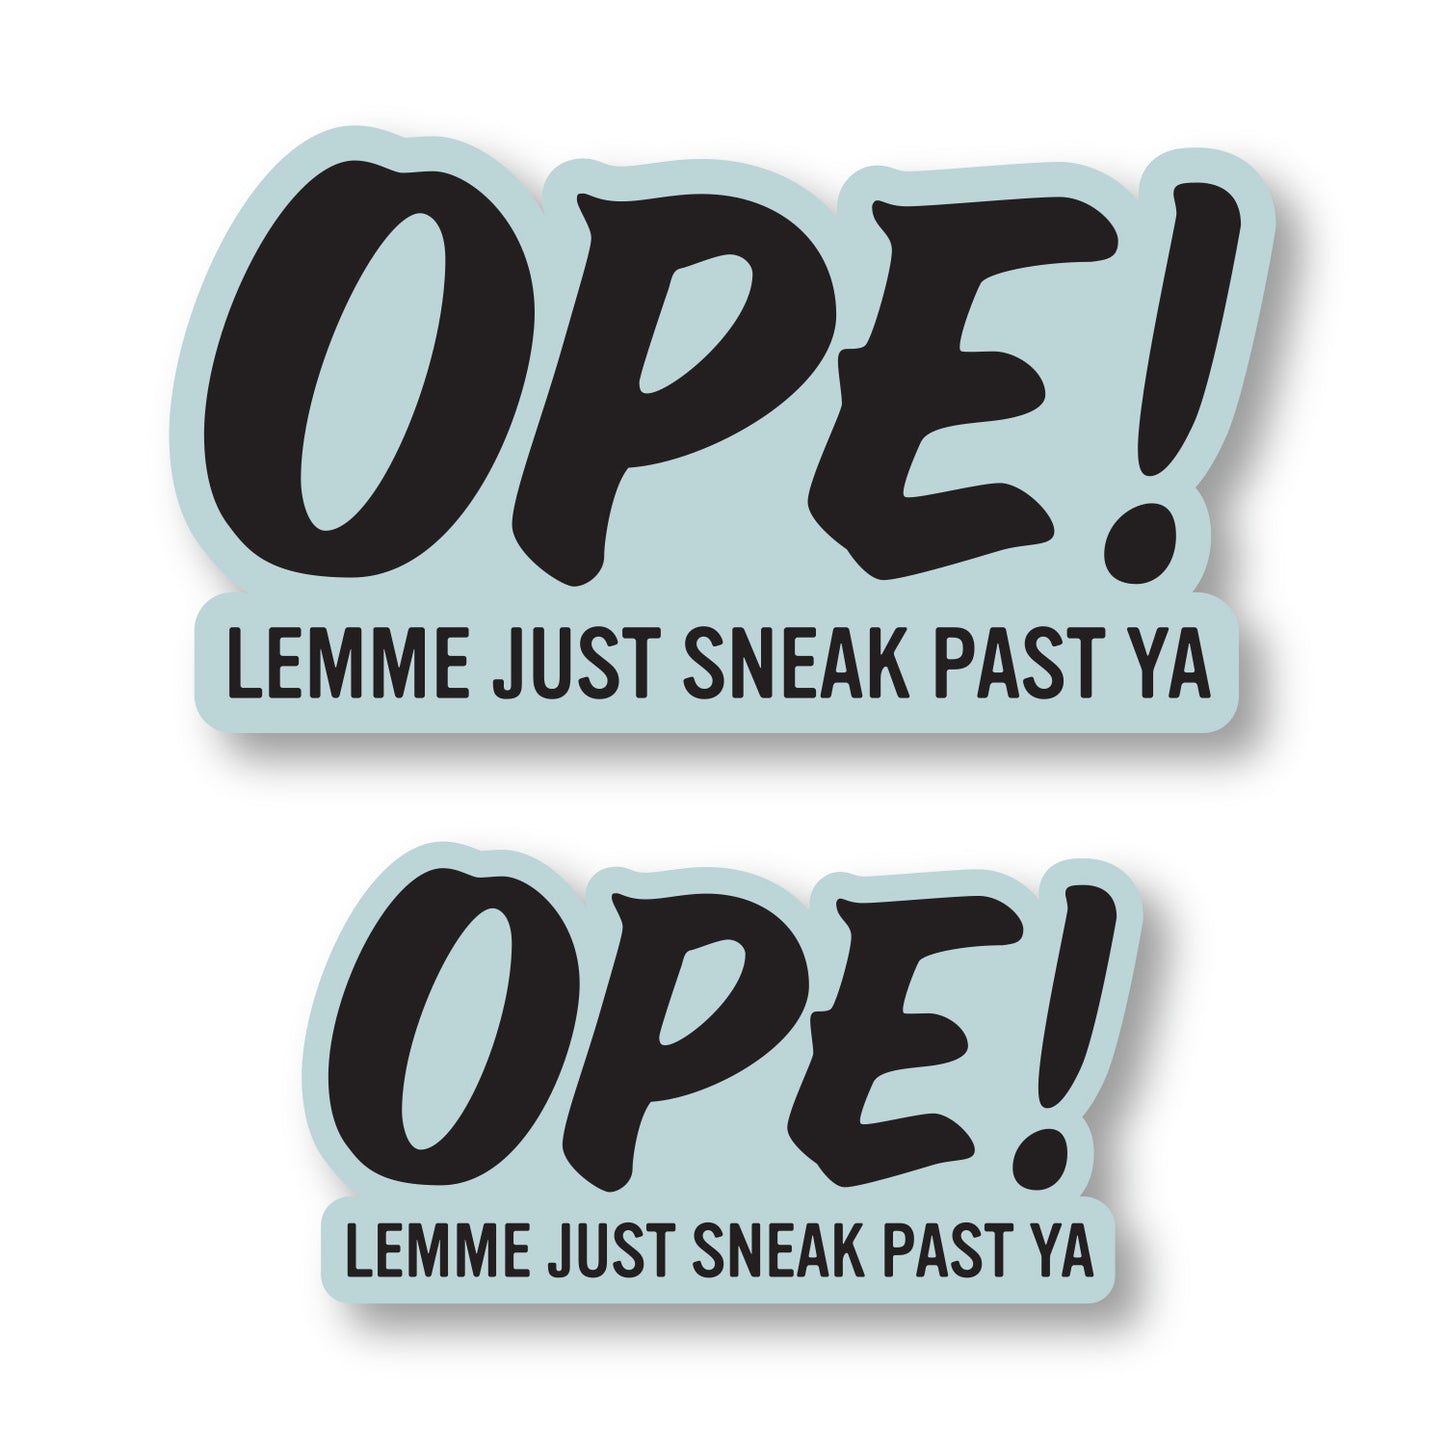 Ope Ope Sticker for Sale by kkerstingshop